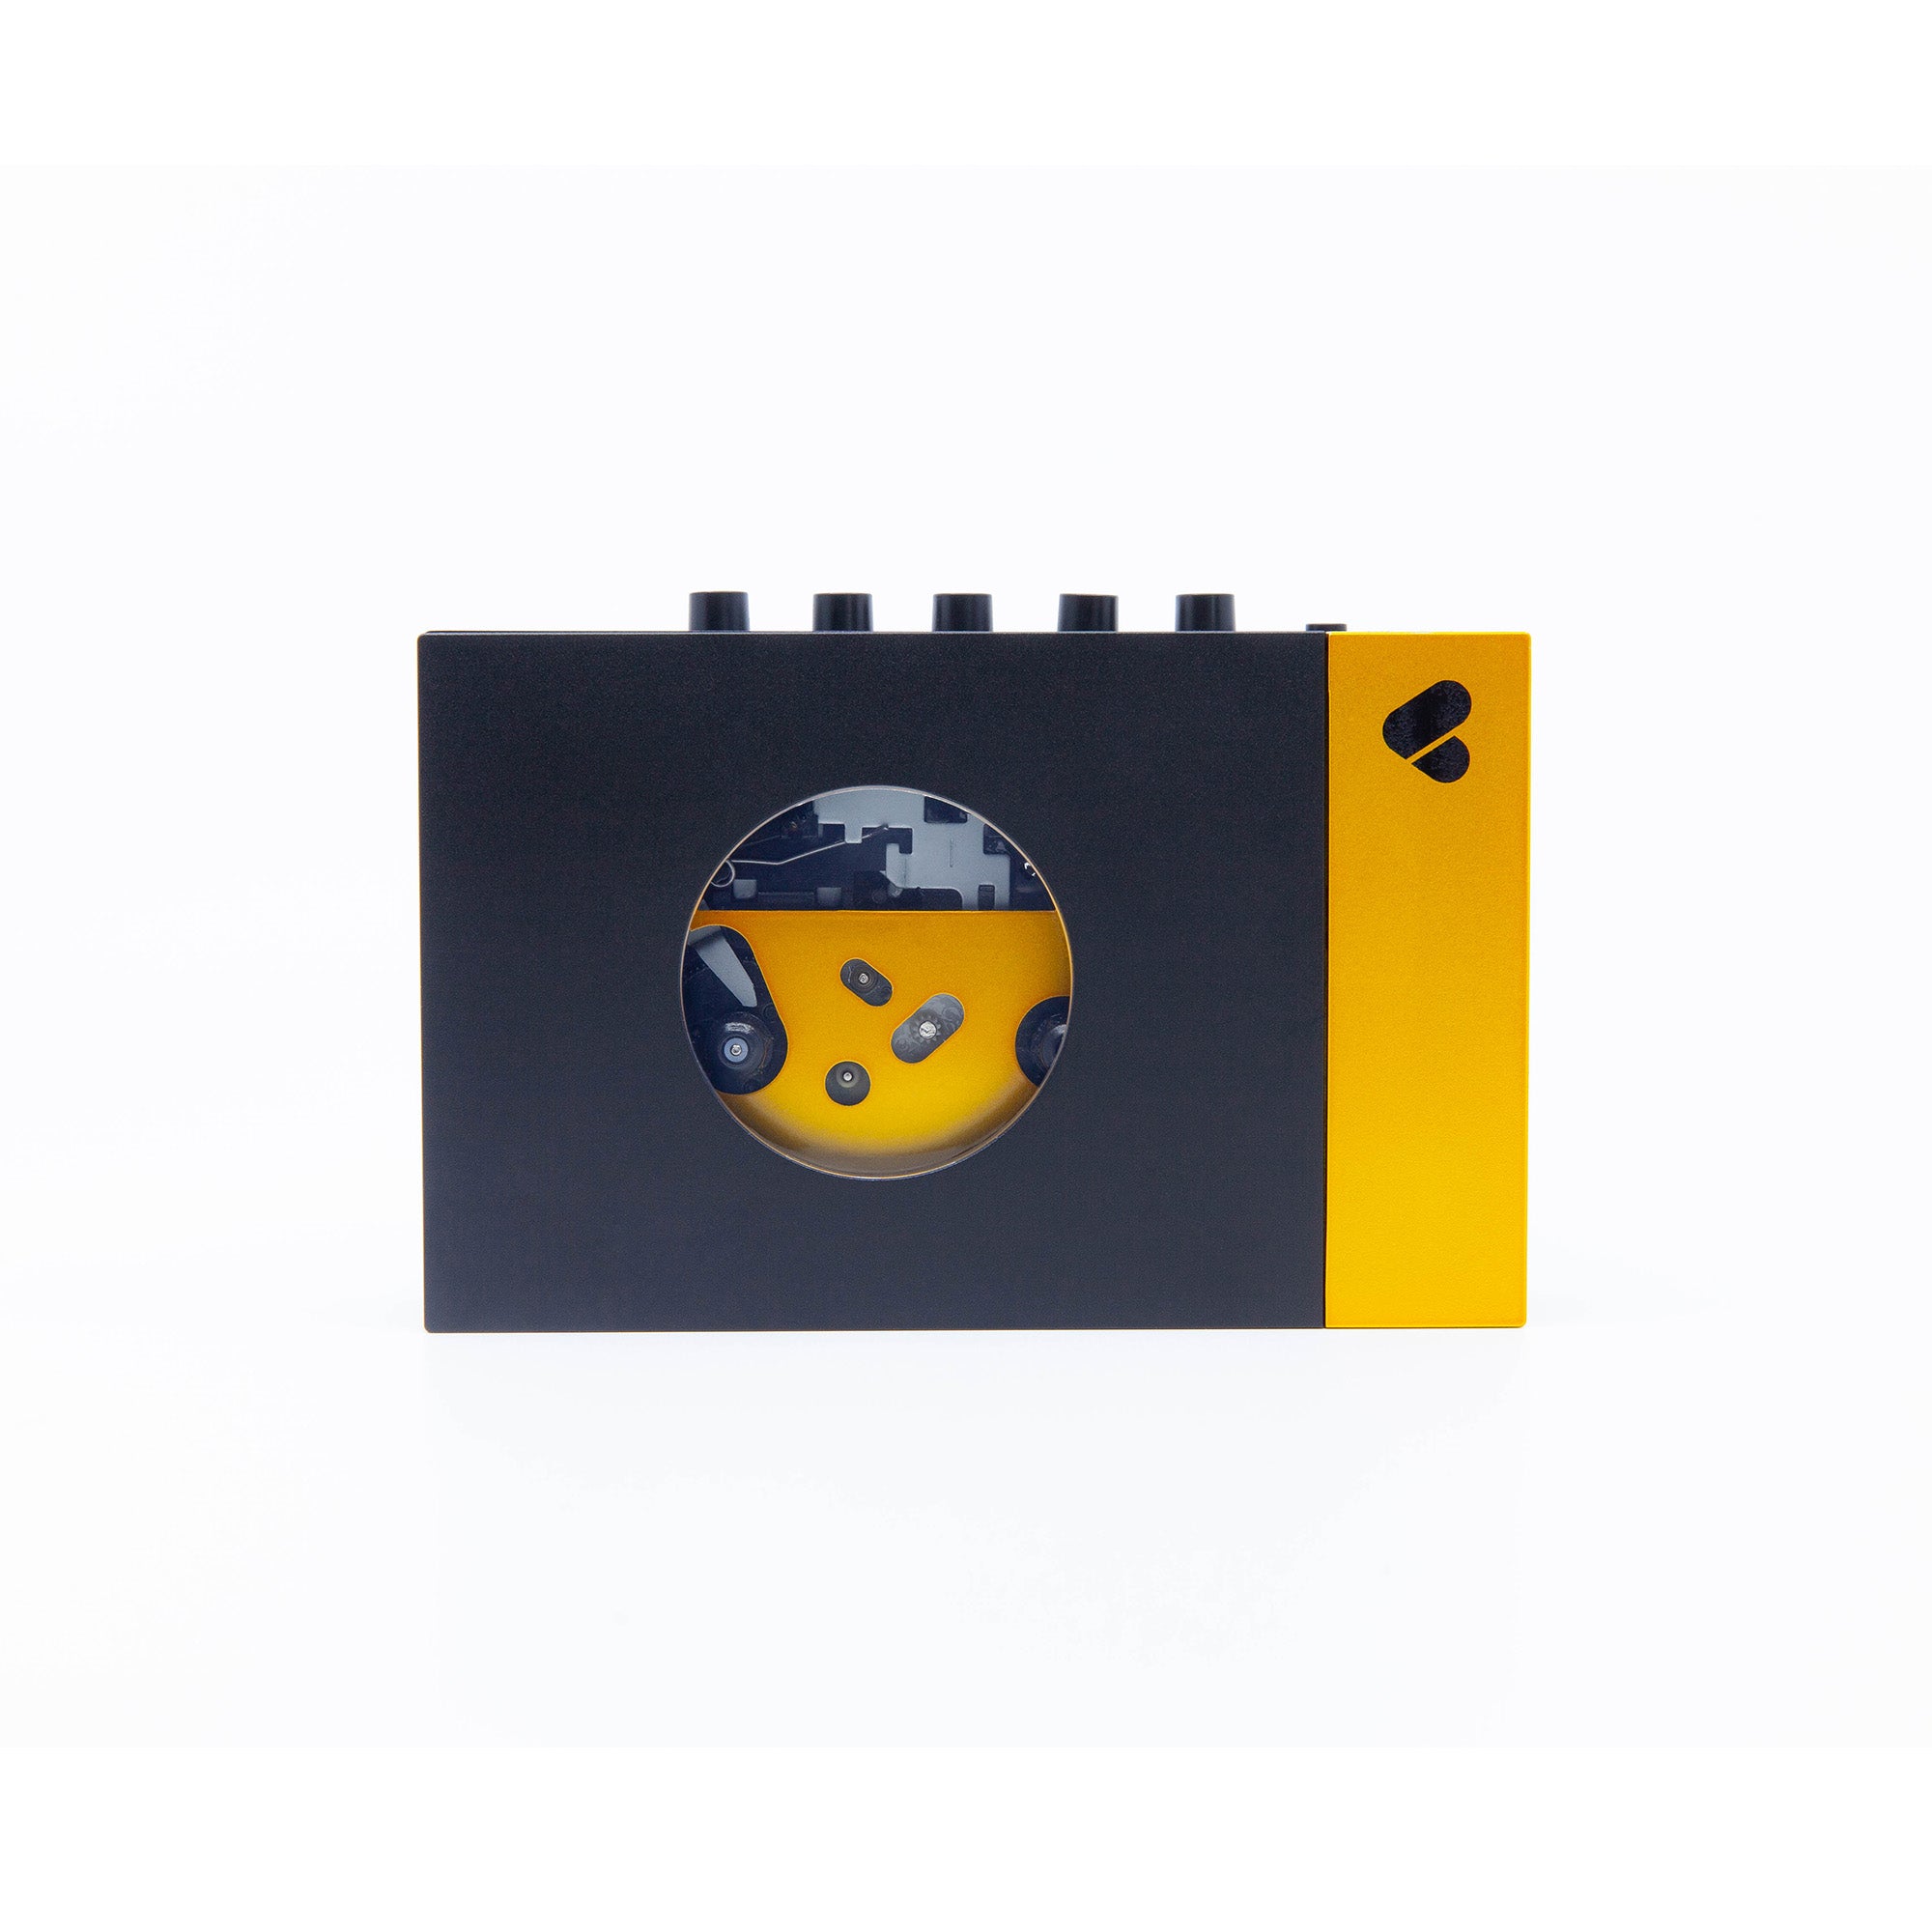 Black & yellow Cassette Player • Amy